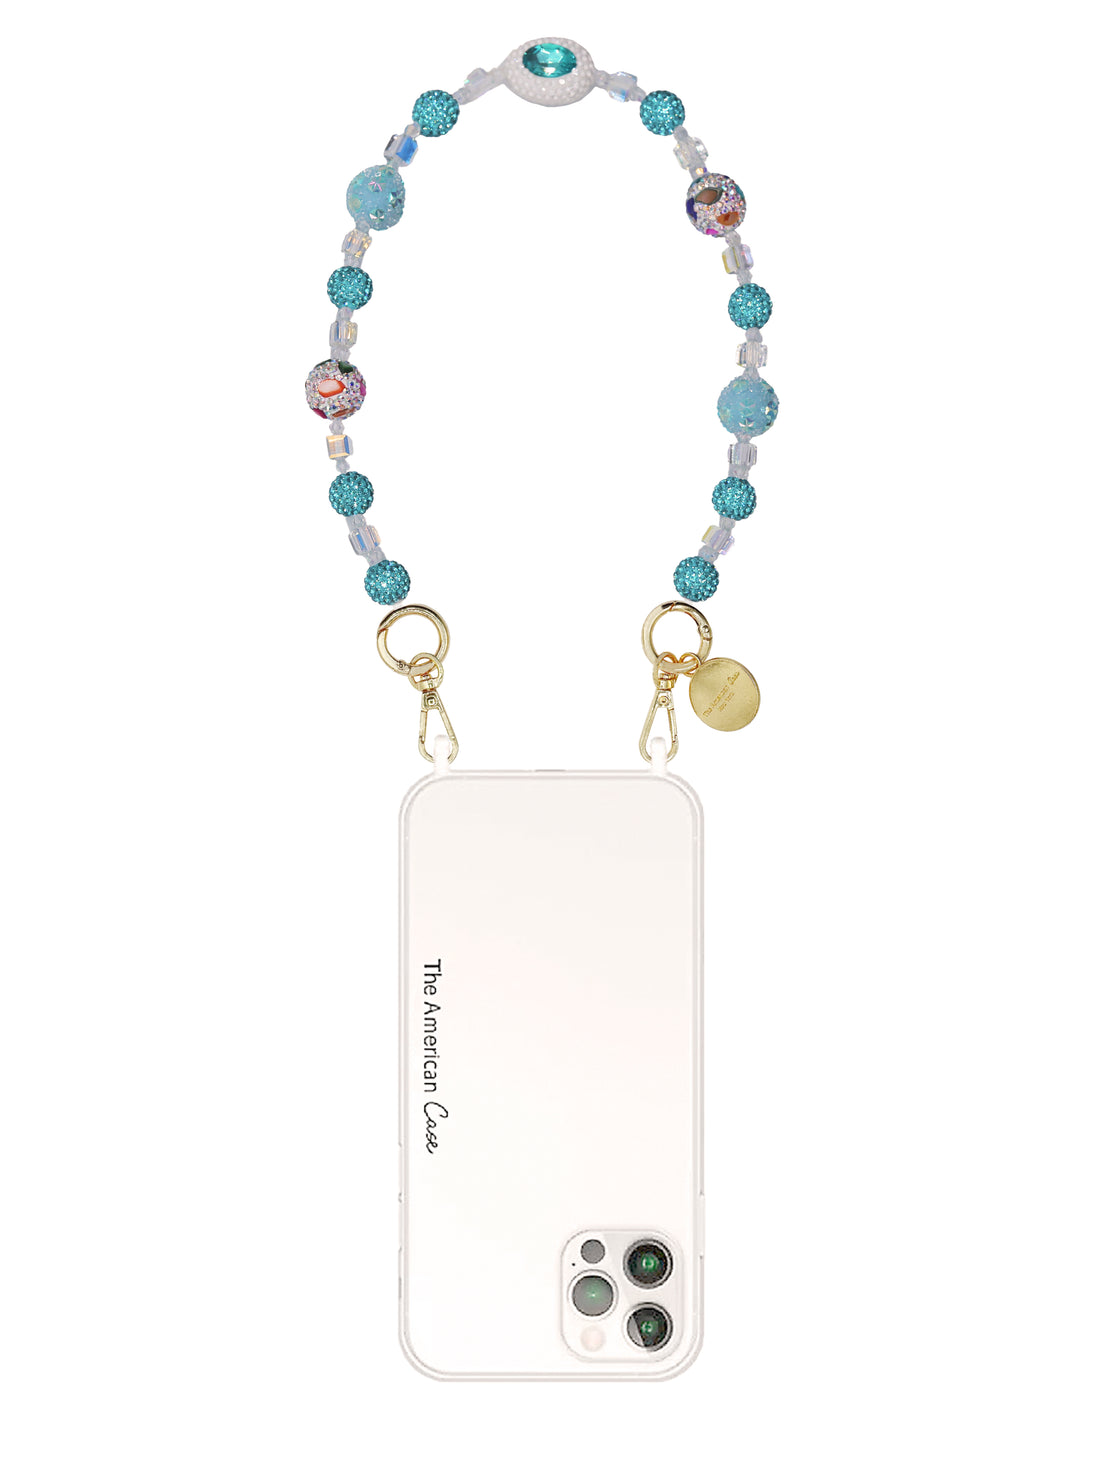 Caroline - Blue Crystal Beads Short Phone Chain with Golden Carabiners